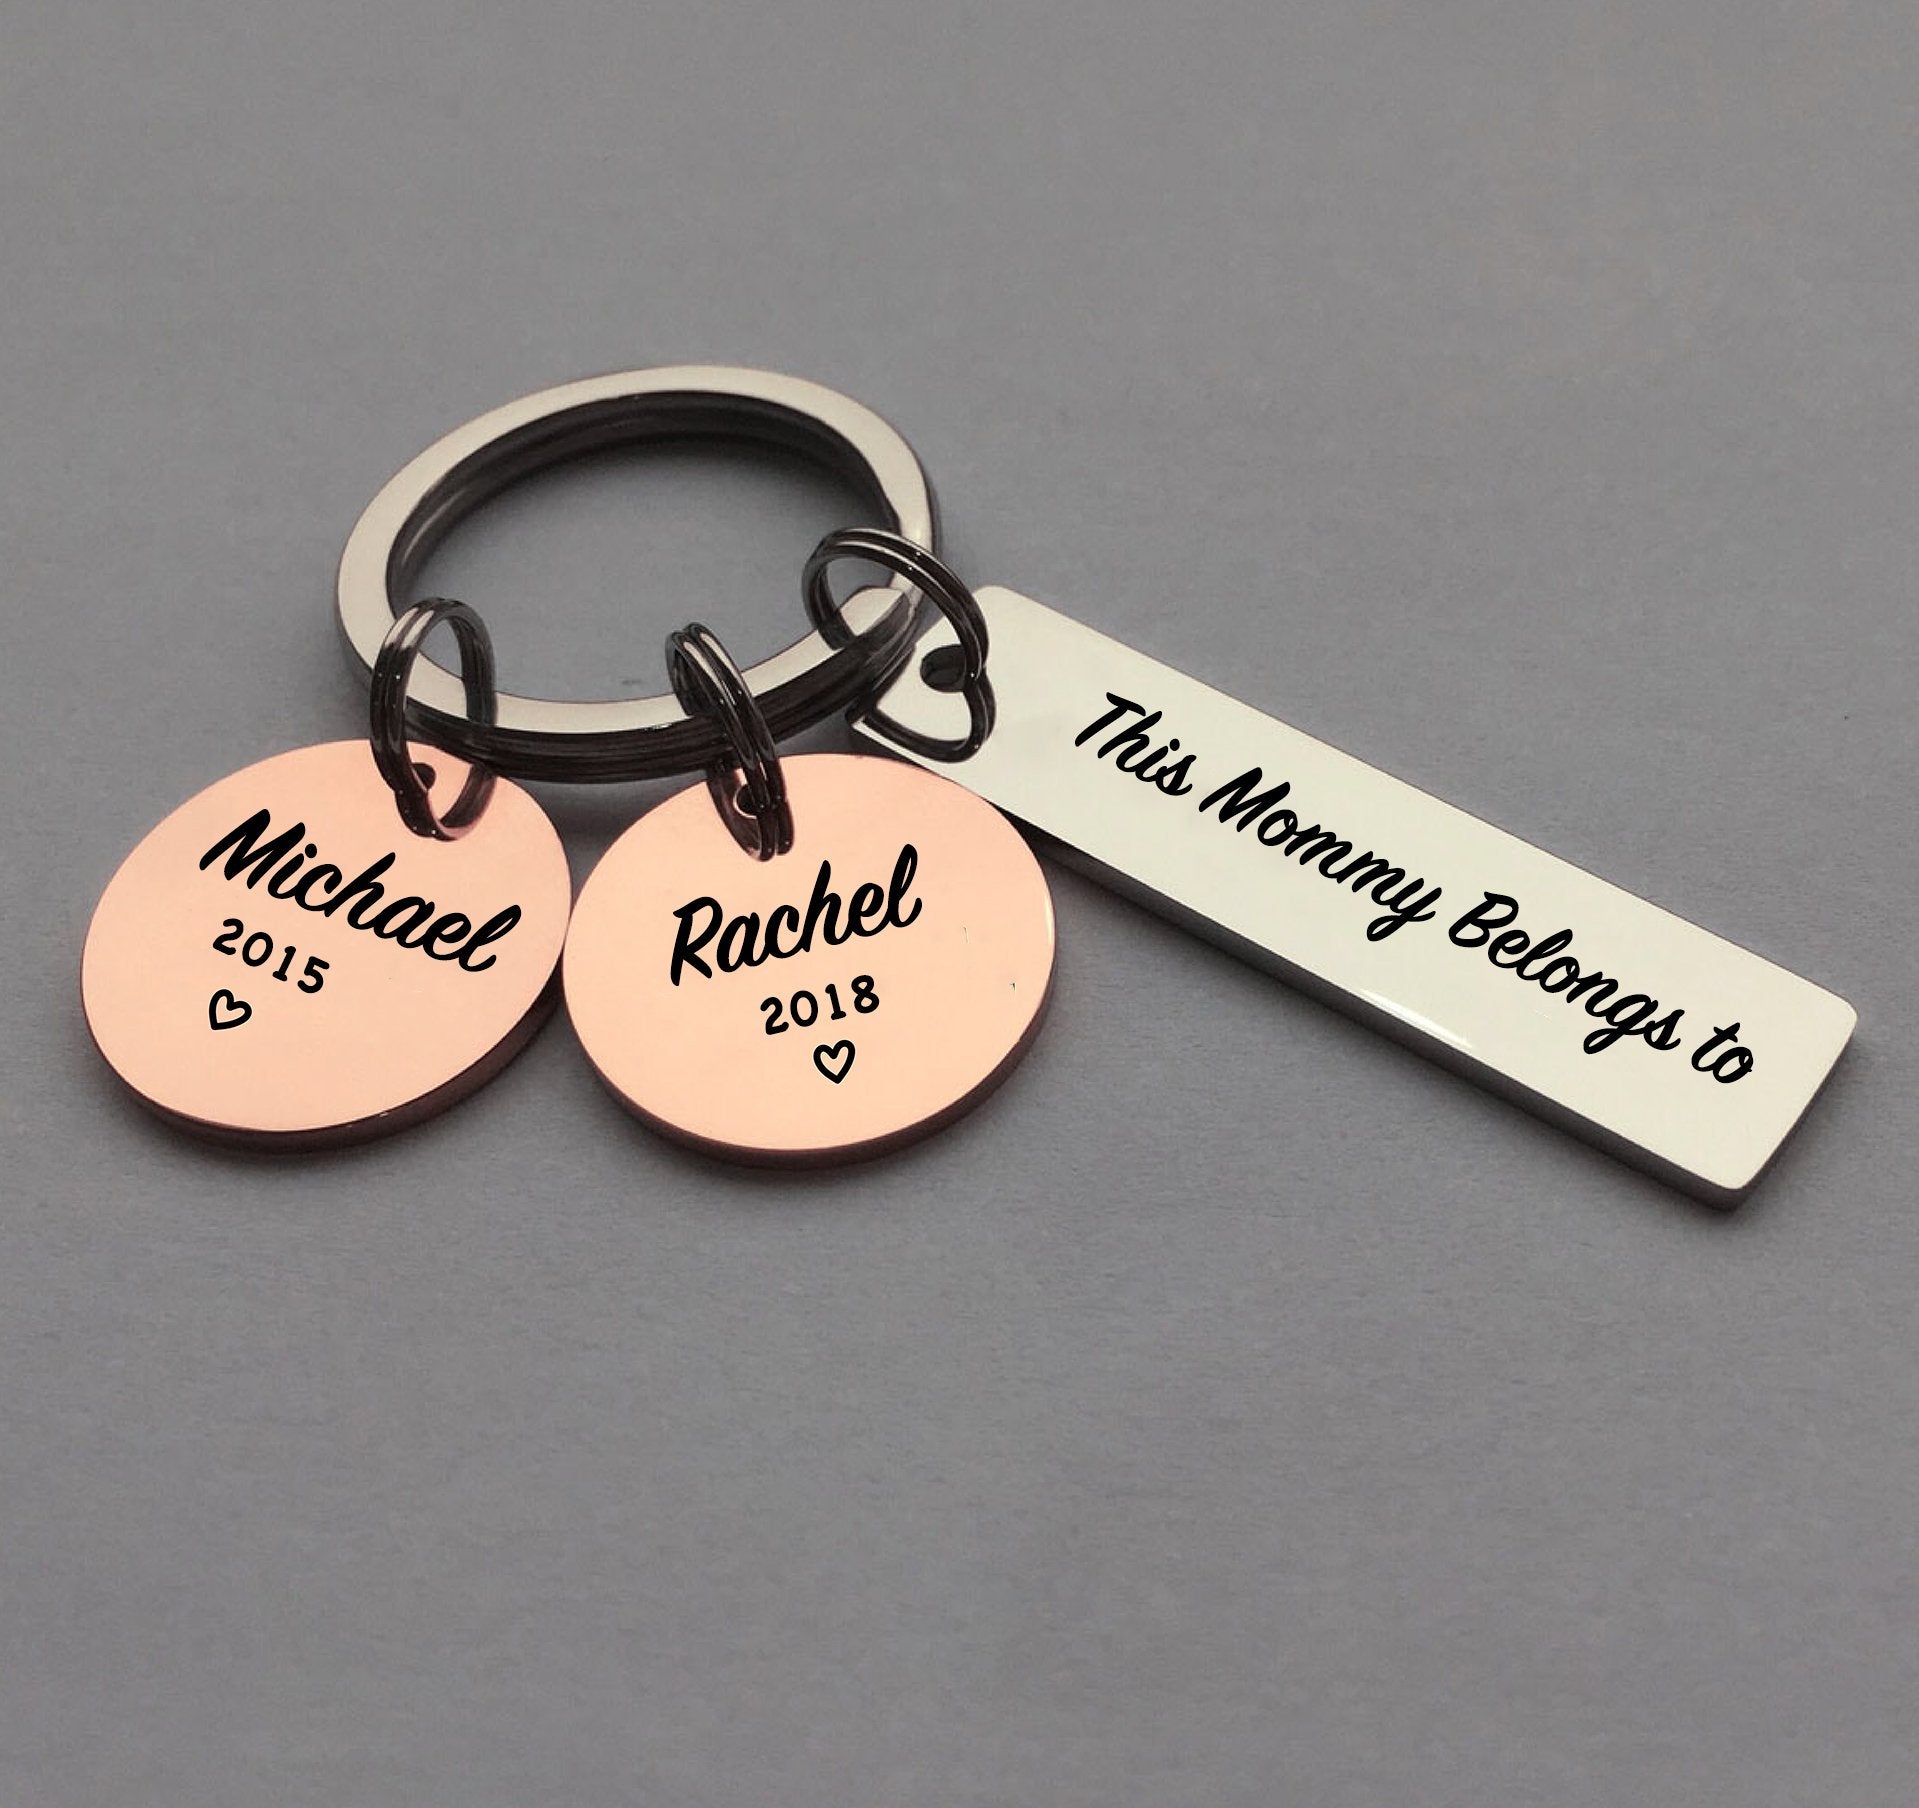 This Mommy belongs to - Personalized Disc keychain